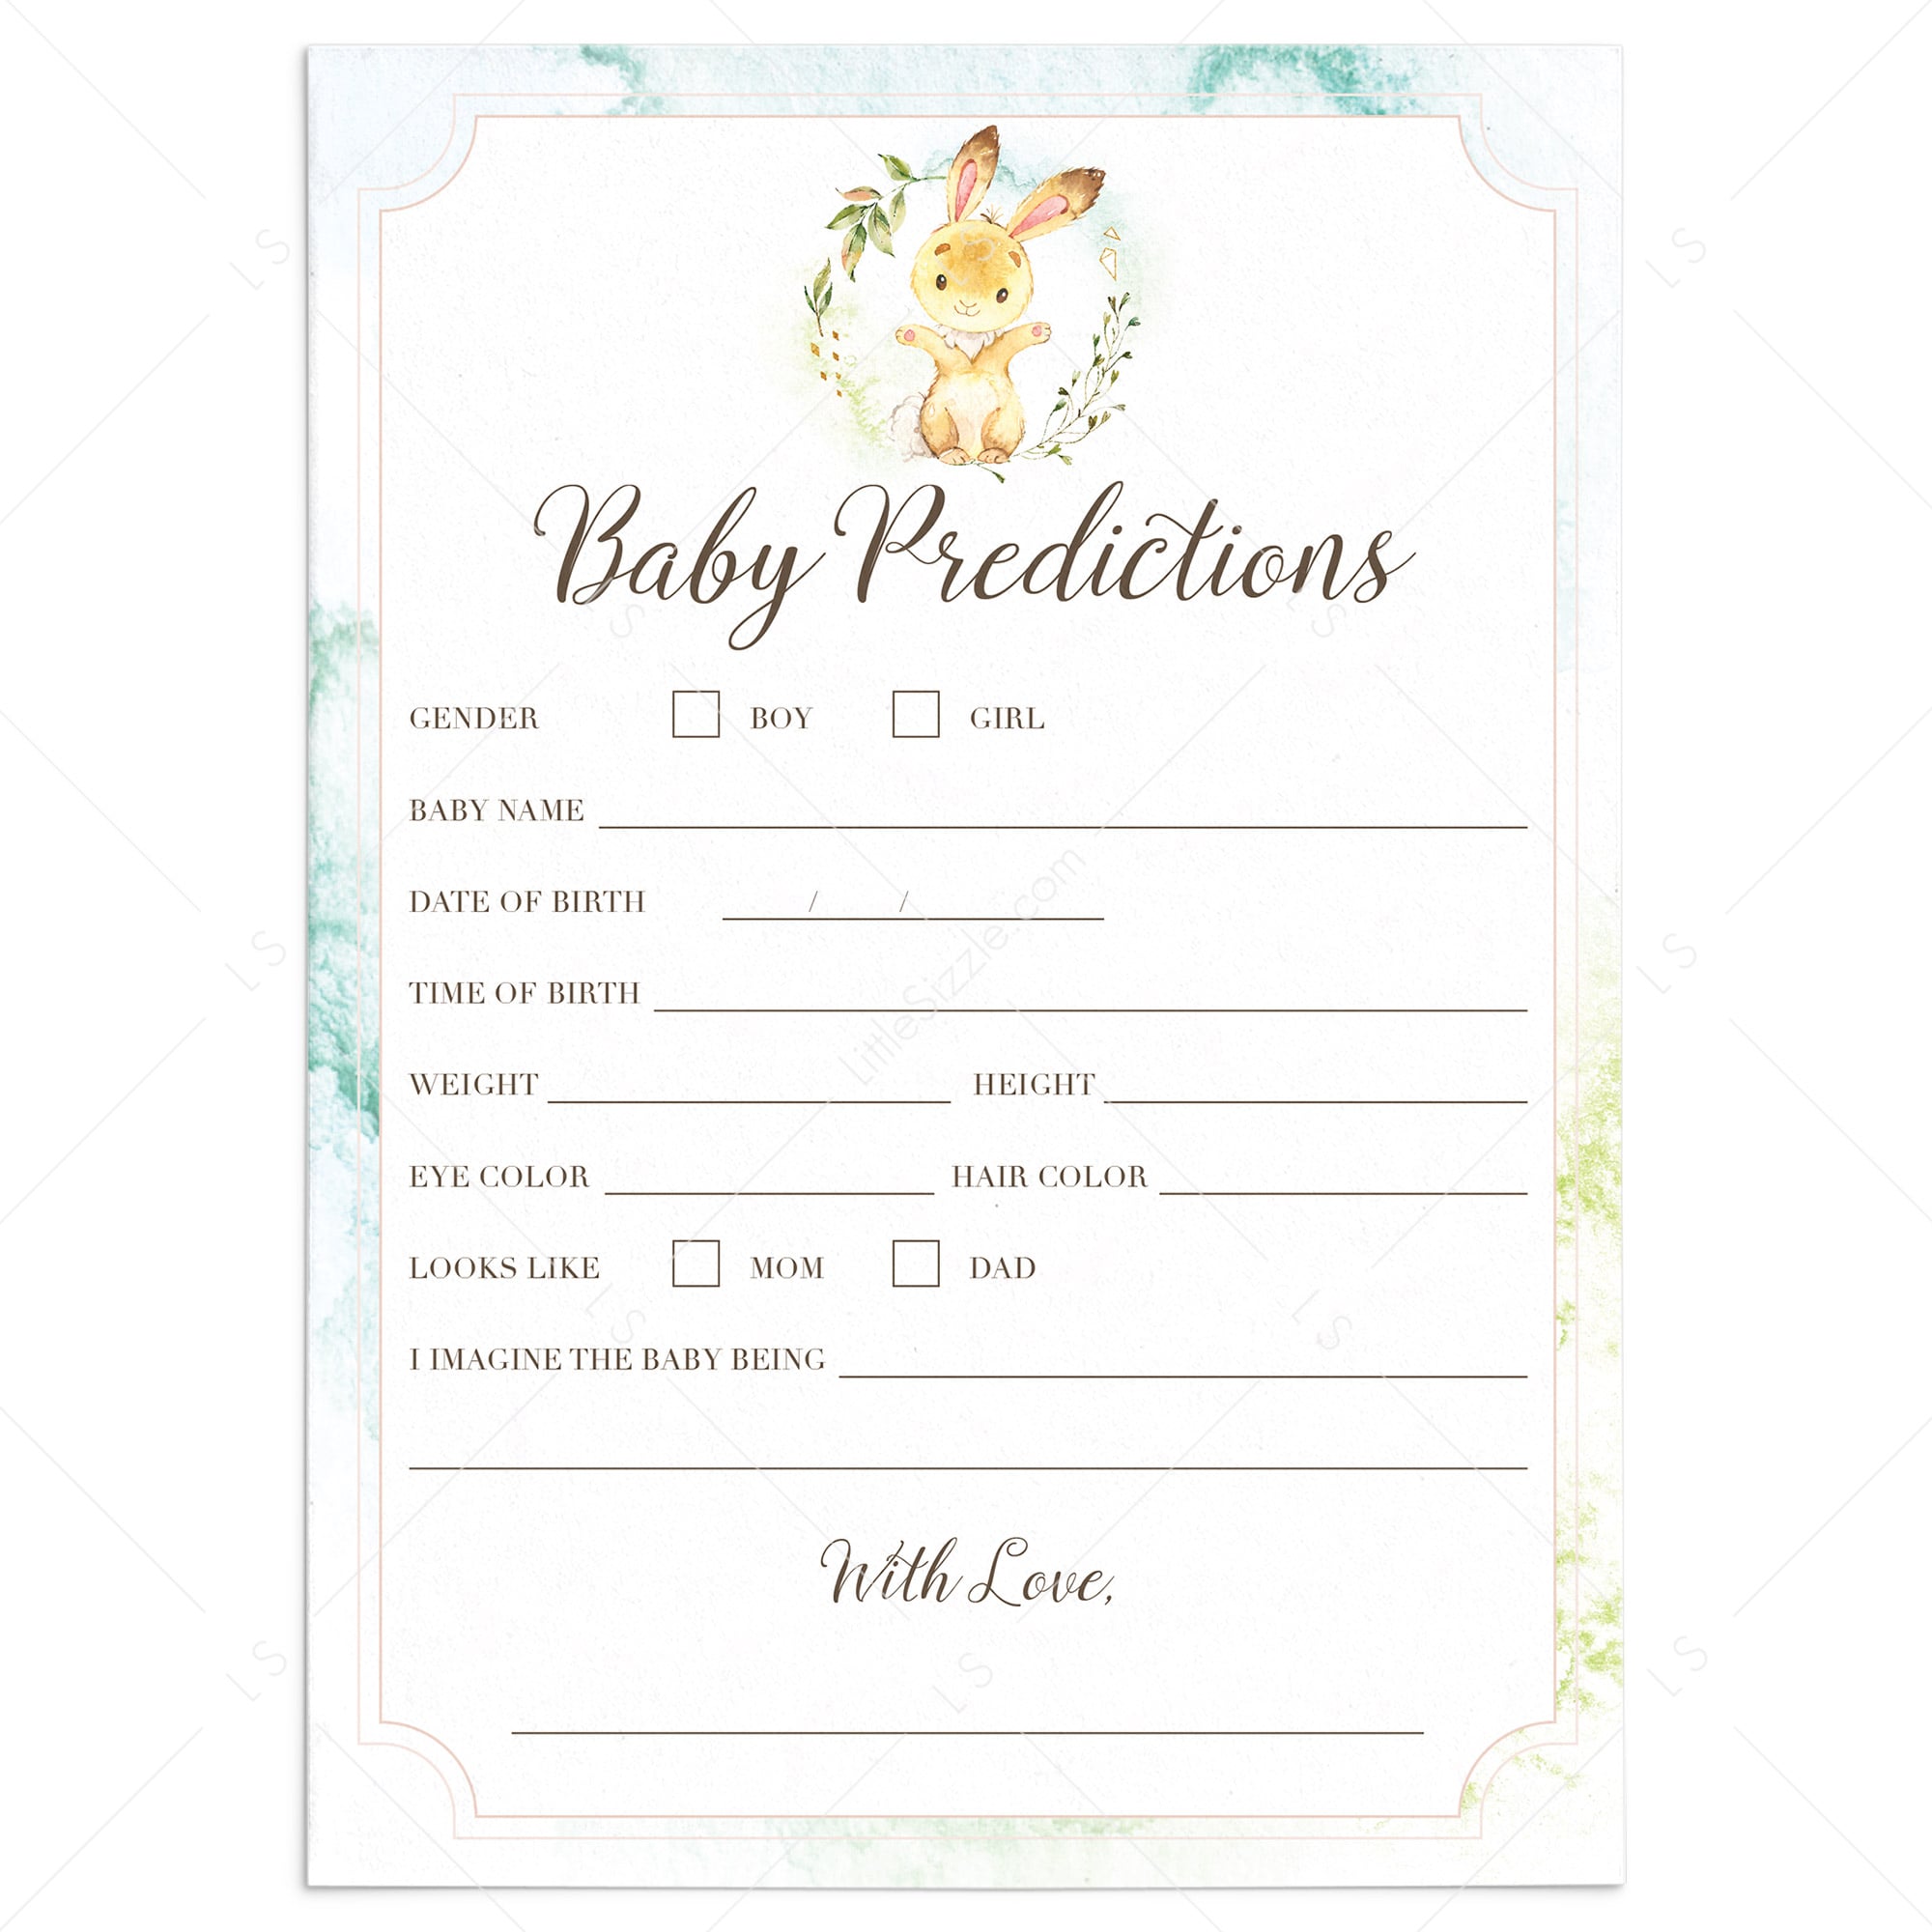 Forest animal baby shower prediction card printable by LittleSizzle